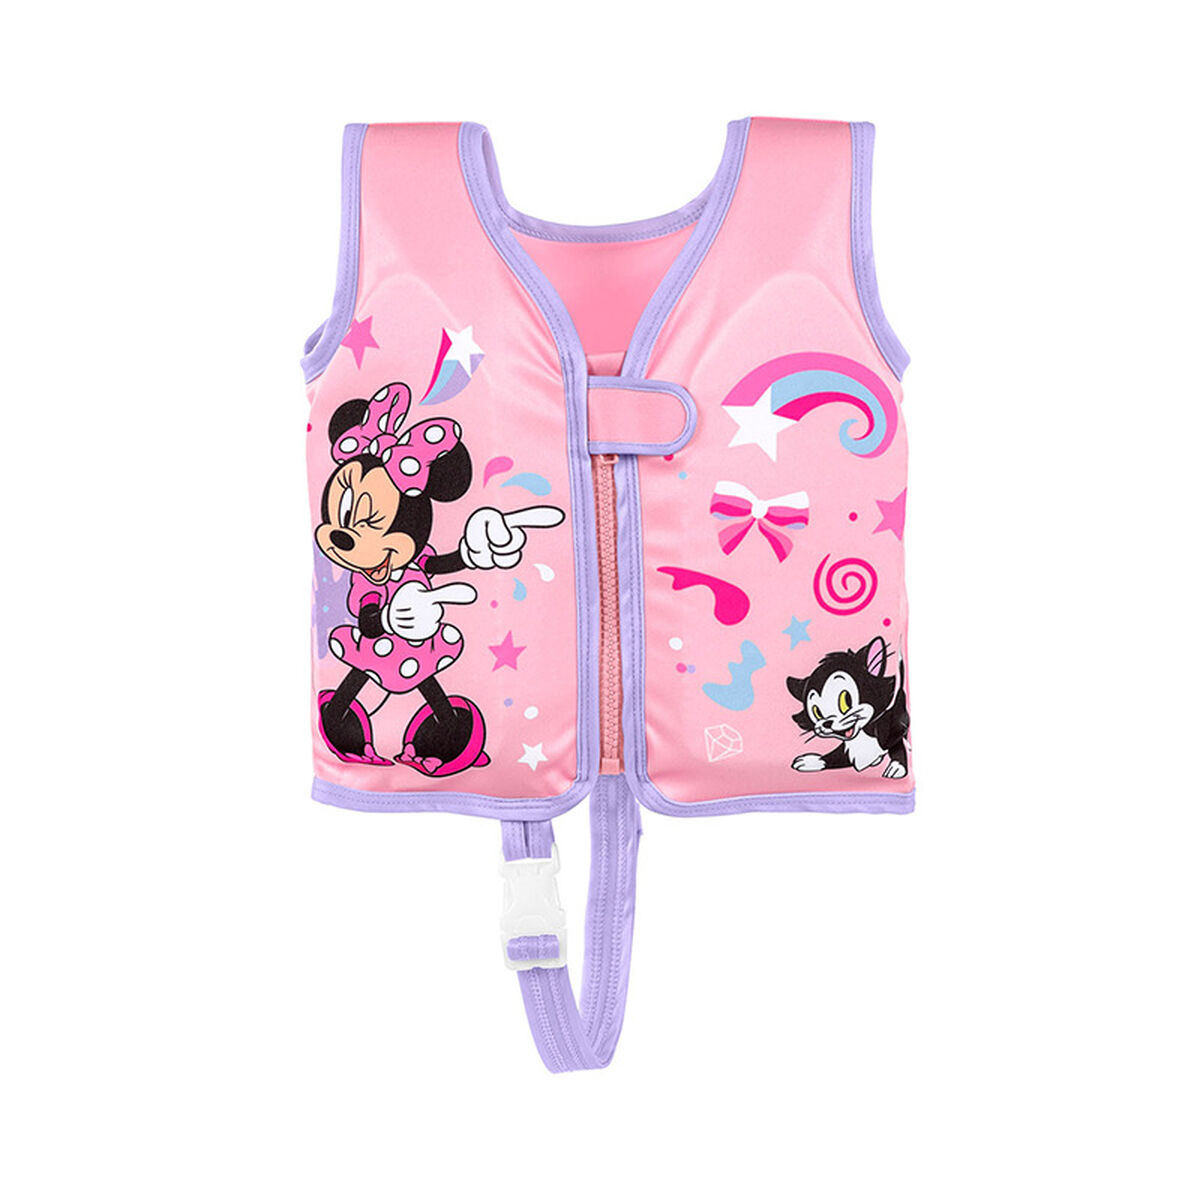 Chaleco Hinchable Para Piscina Bestway Minnie Mouse - rosa - 